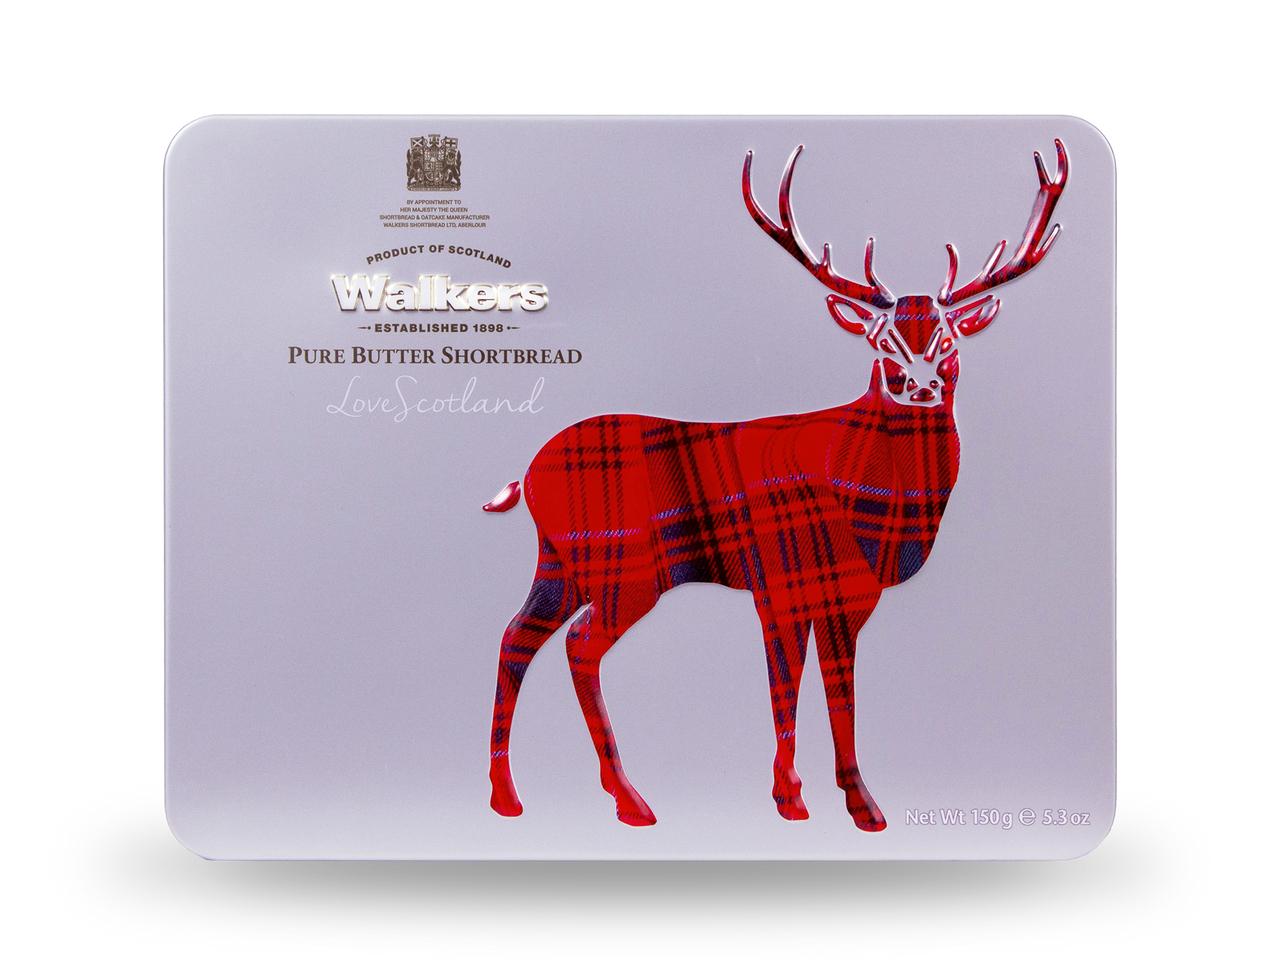 walkers-pure-butter-shortbread-stag-icon-tin